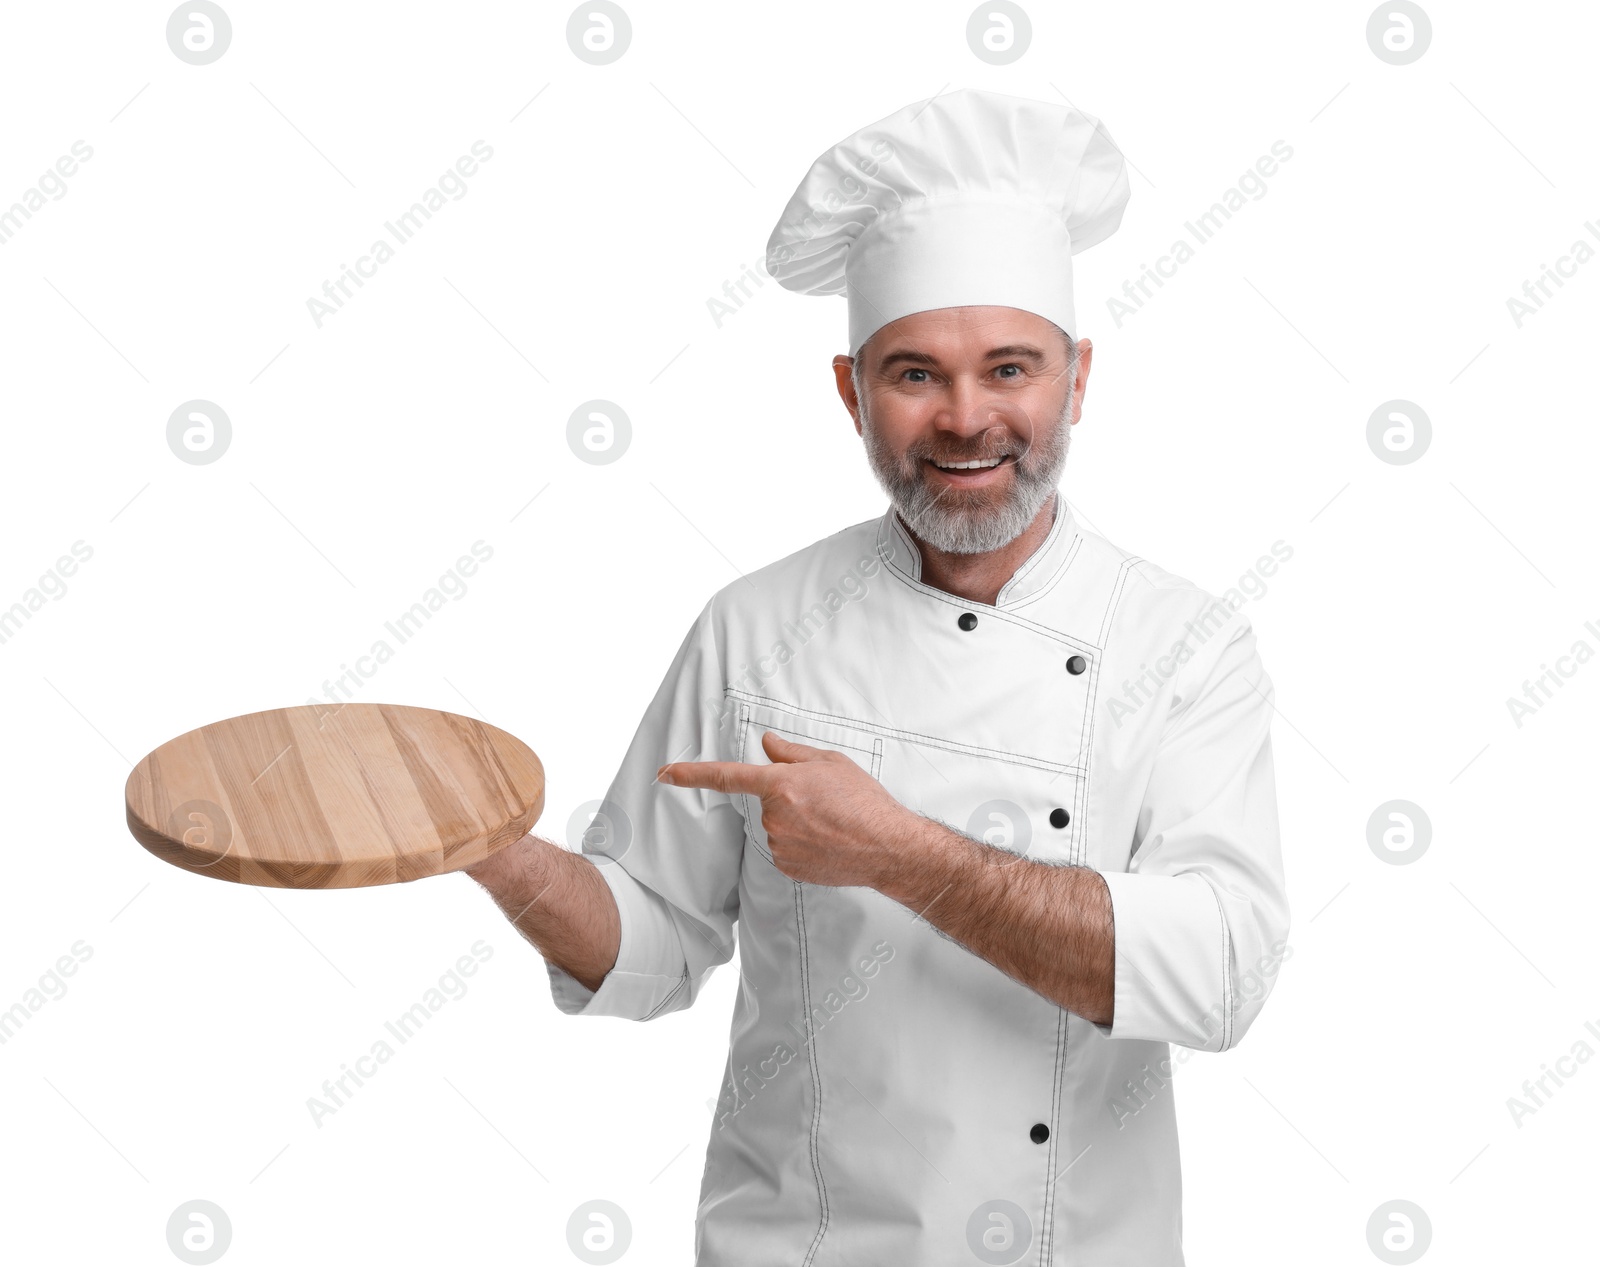 Photo of Happy chef in uniform pointing at wooden board on white background